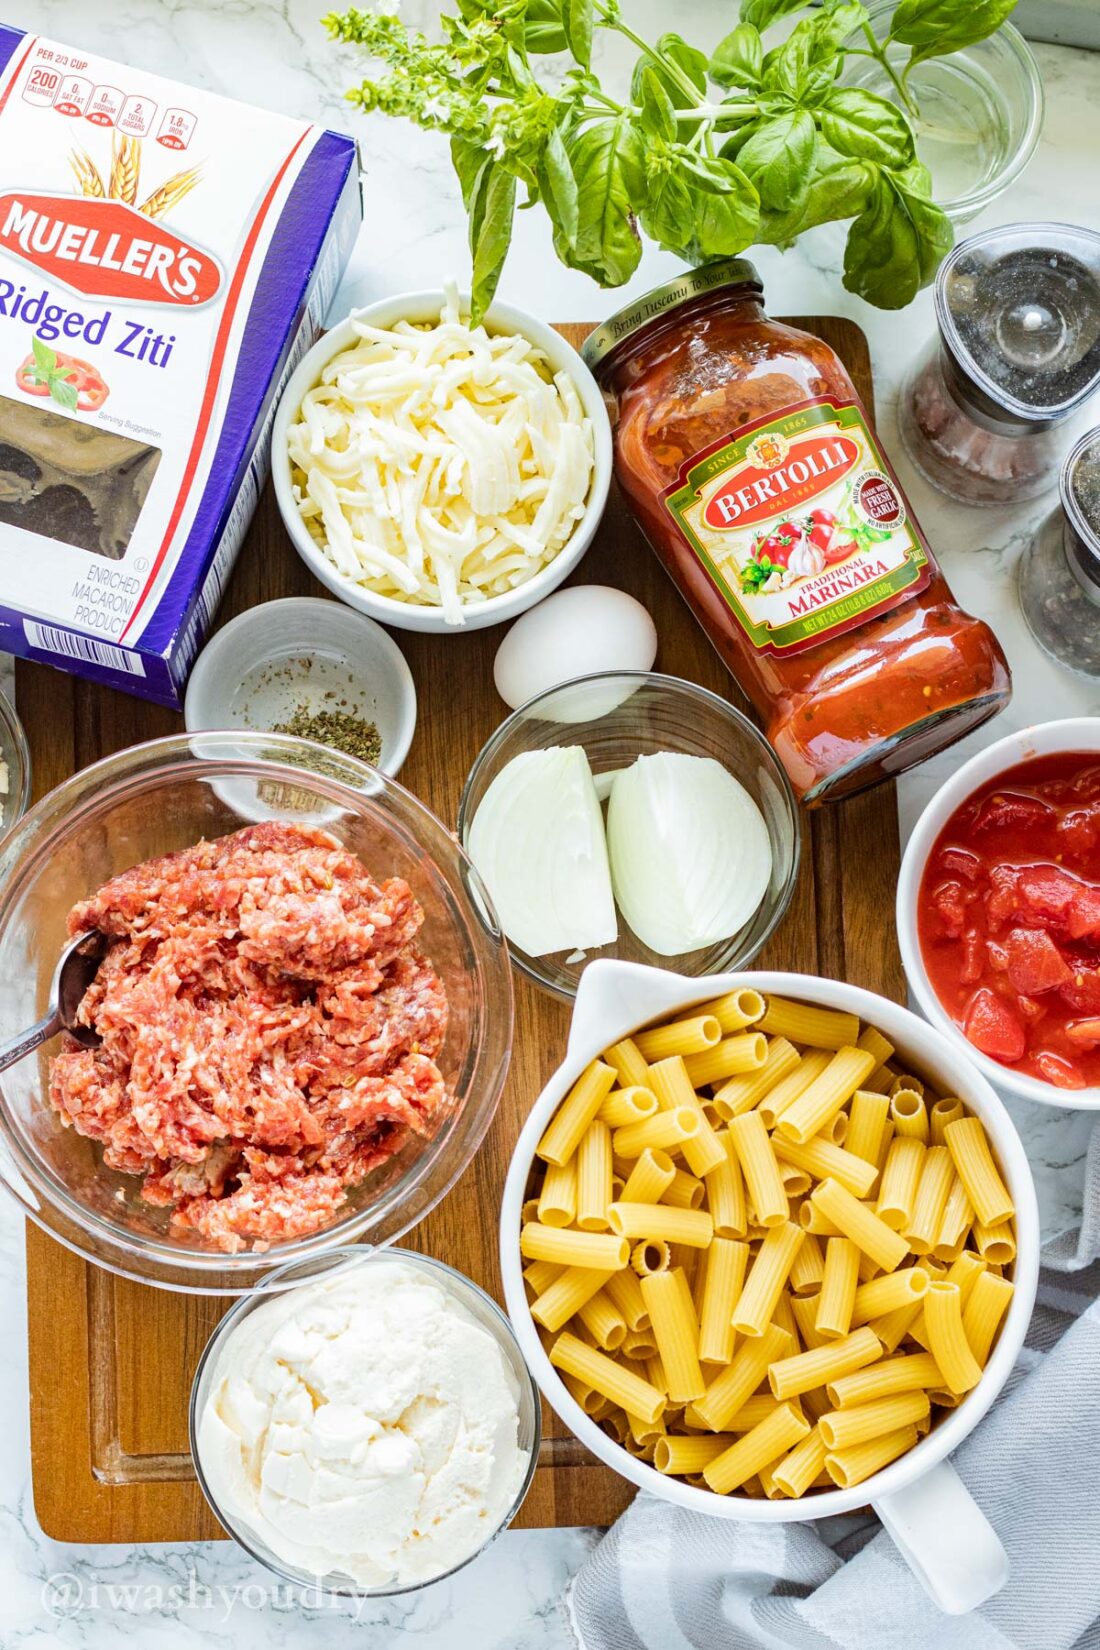 Ingredients for Slow Cooker Baked Ziti on wood cutting board